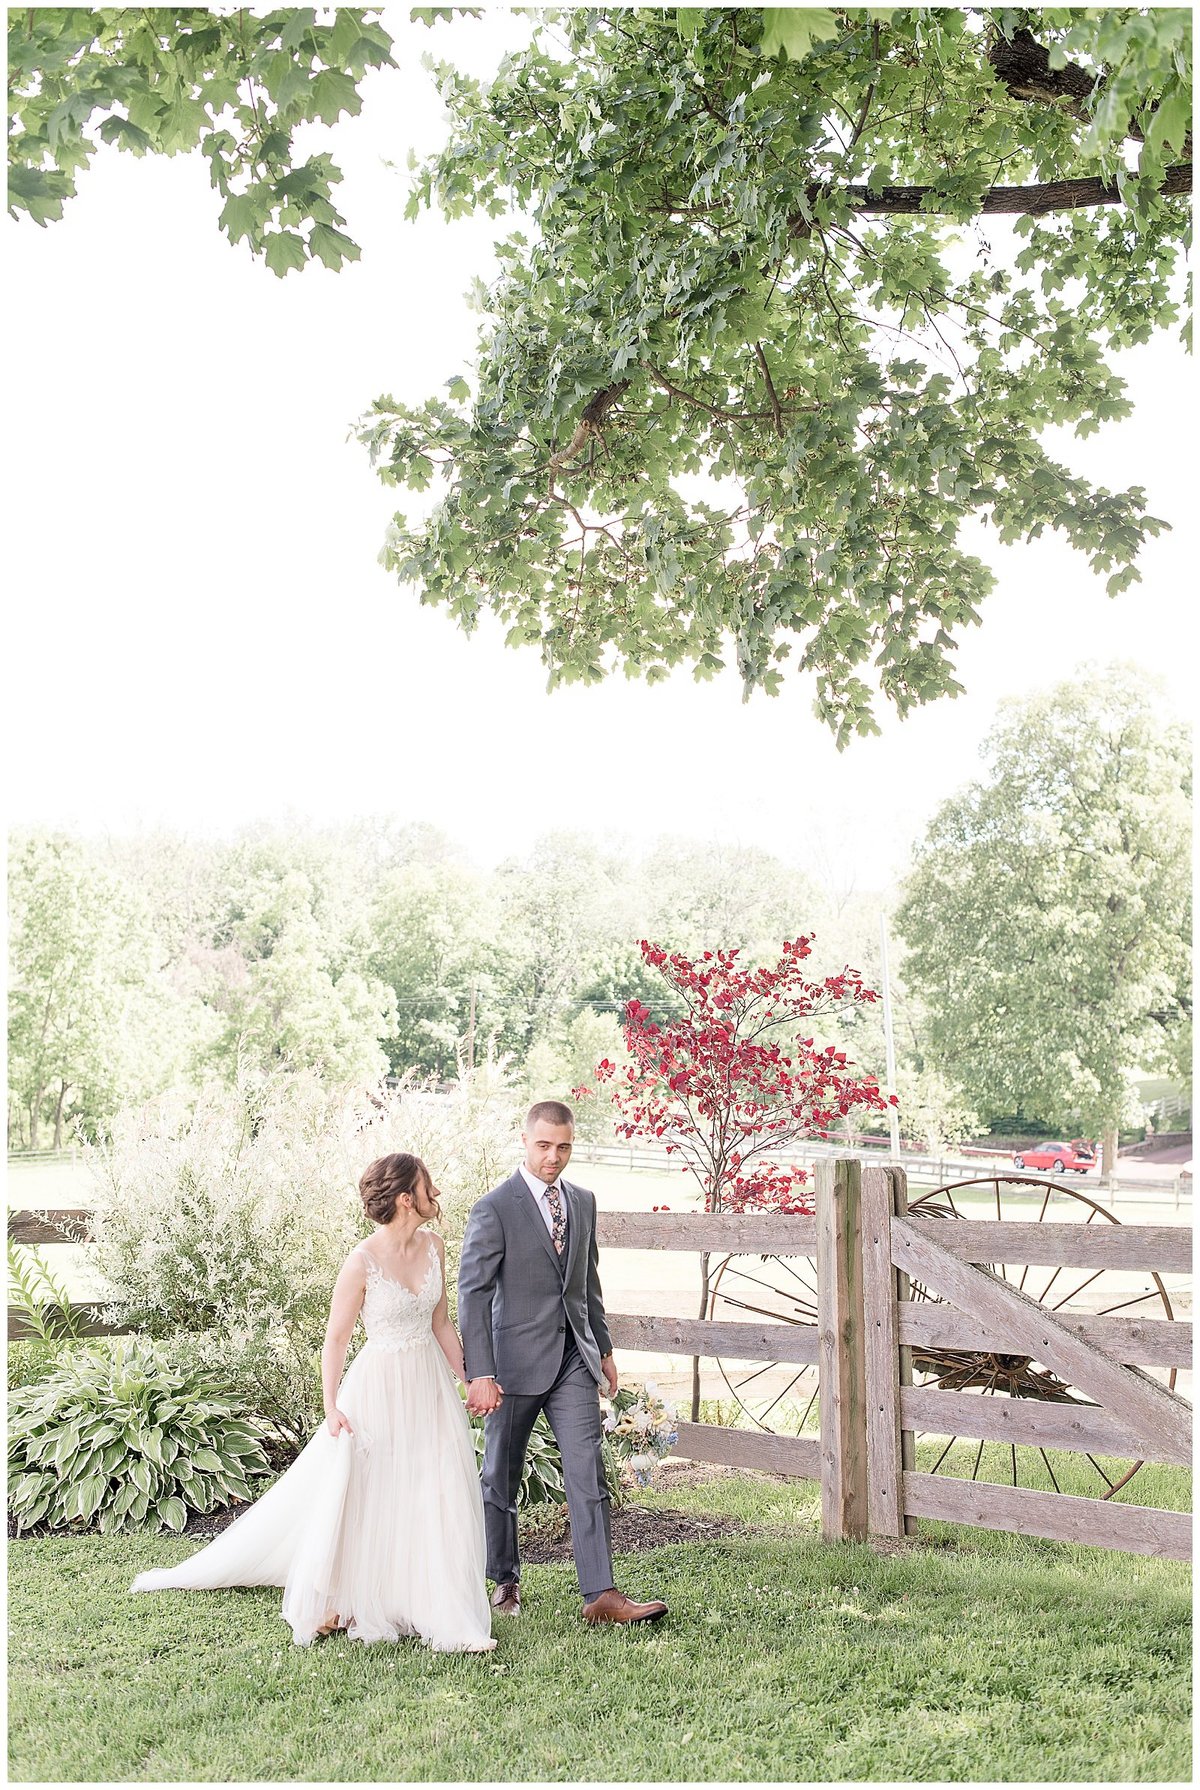 Bride and Groom holding hands and walking along wooden fence at farm in Central Pennsylvania.